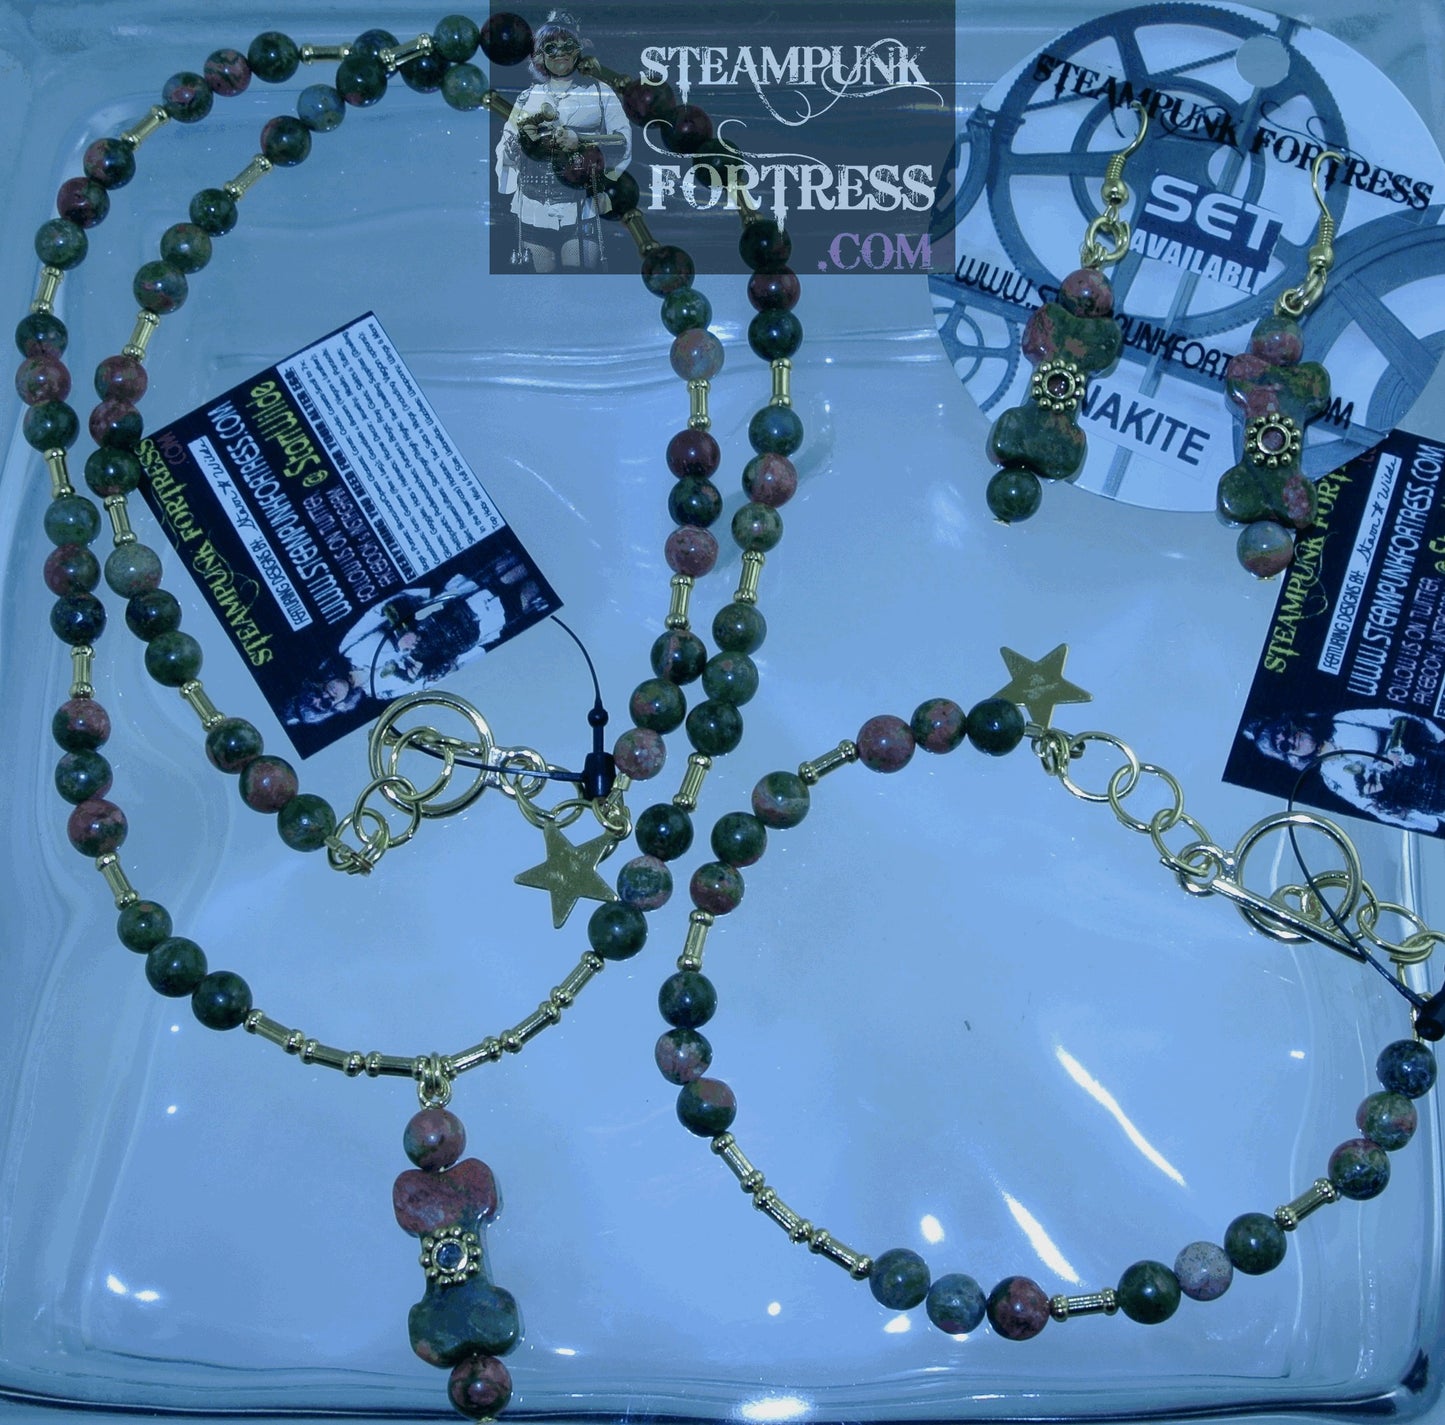 GOLD UNAKITE DOG BONE GEMSTONES STONES GEAR DOG BONE BEADS NECKLACE SET AVAILABLE 2 SIDED REVERSIBLE STARR WILDE STEAMPUNK FORTRESS